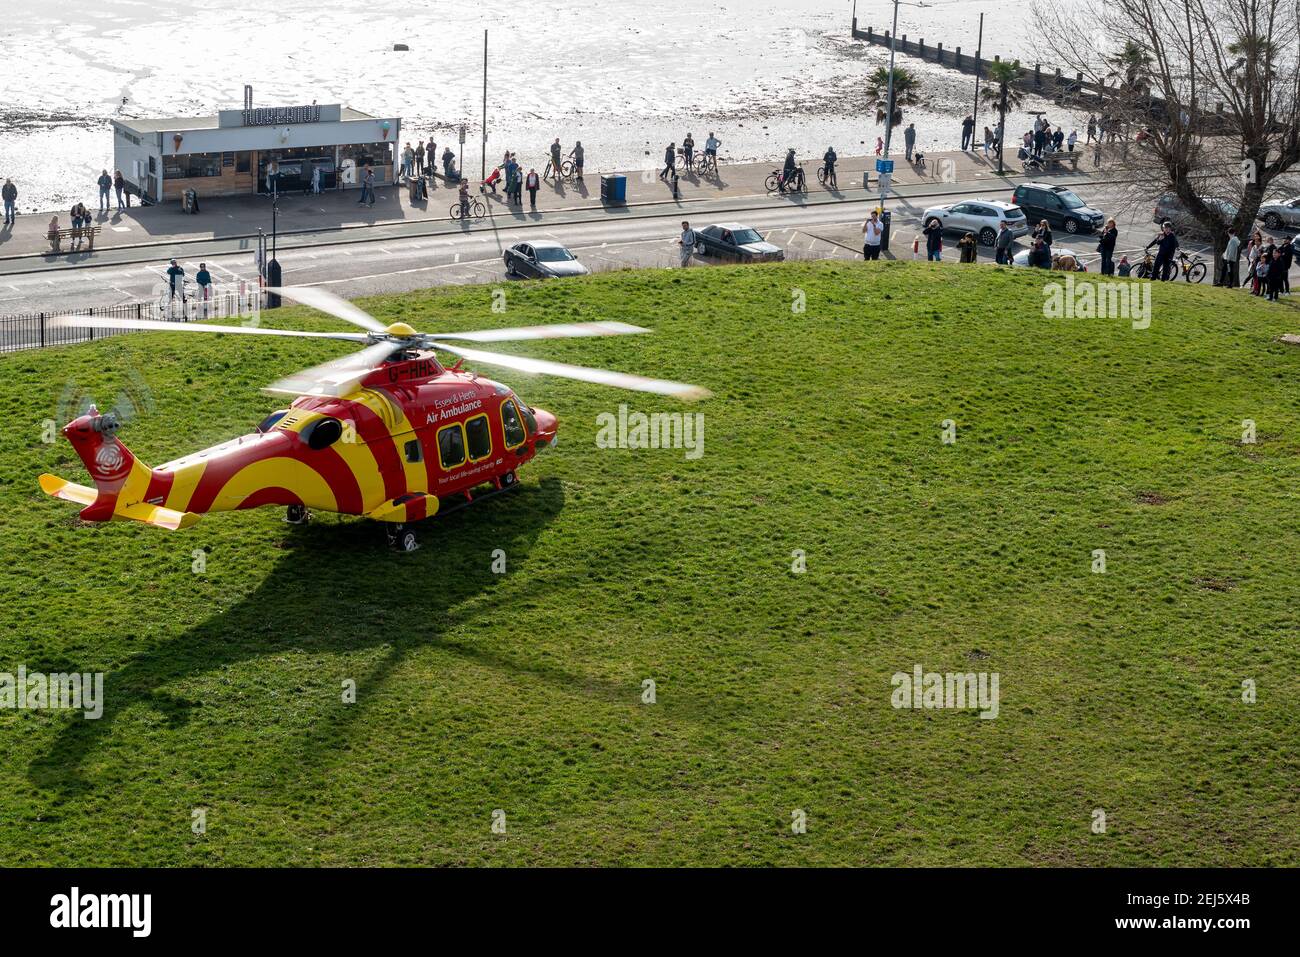 Essex & Herts Air Ambulance landed on cliffs in Southend on Sea, Essex, UK, on a bright sunny winter day, during COVID 19 lockdown. People on seafront Stock Photo